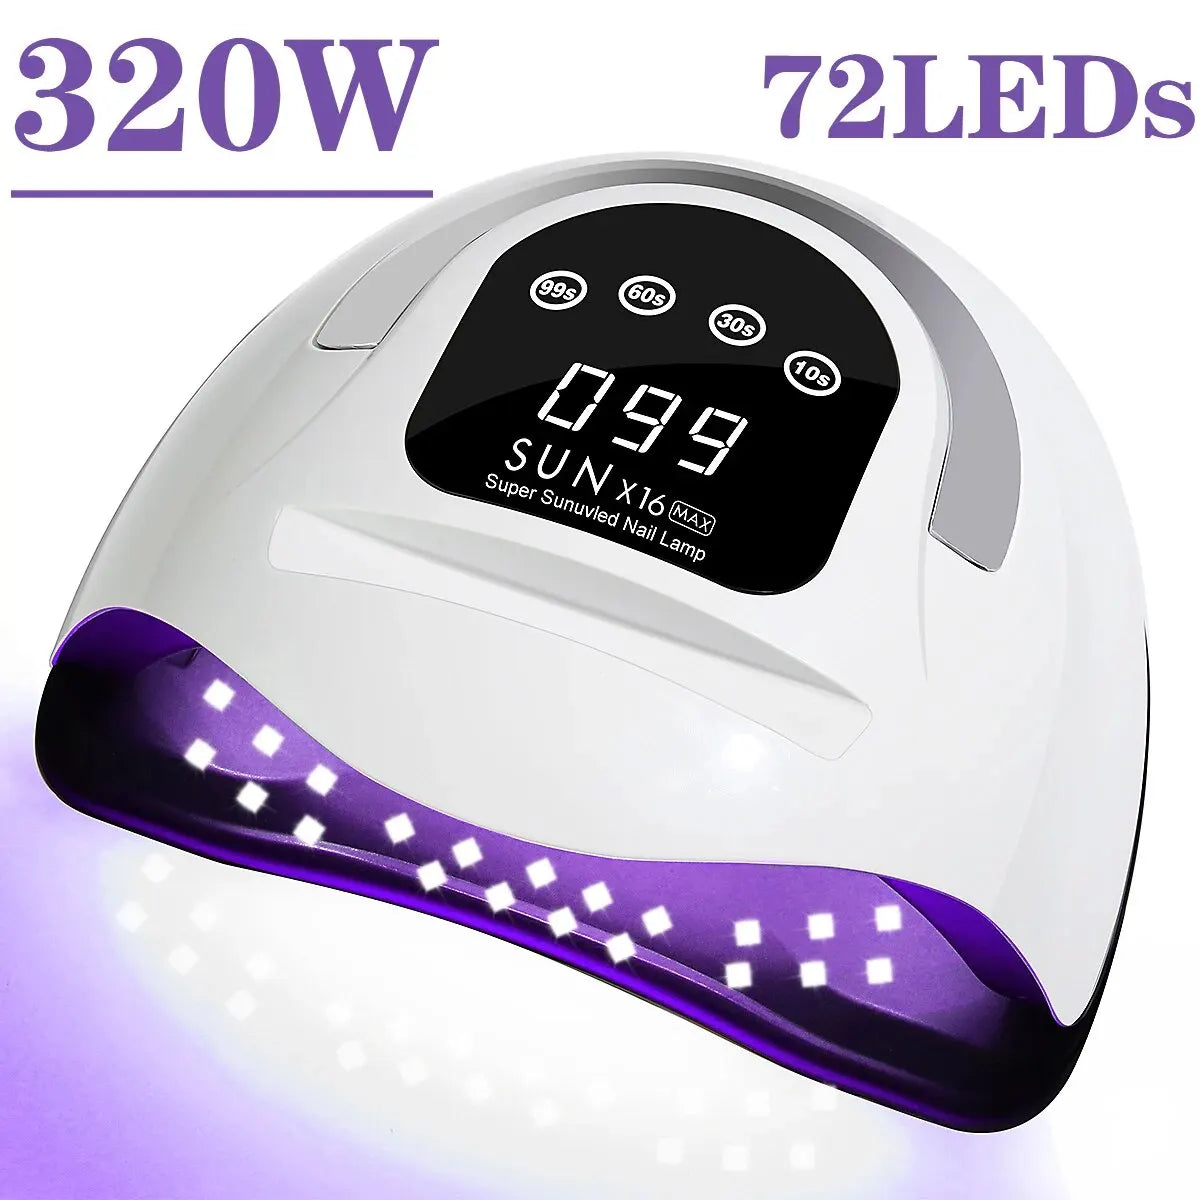 UV LED Nail Lamp: Professional Gel Polish Dryer with Memory Function